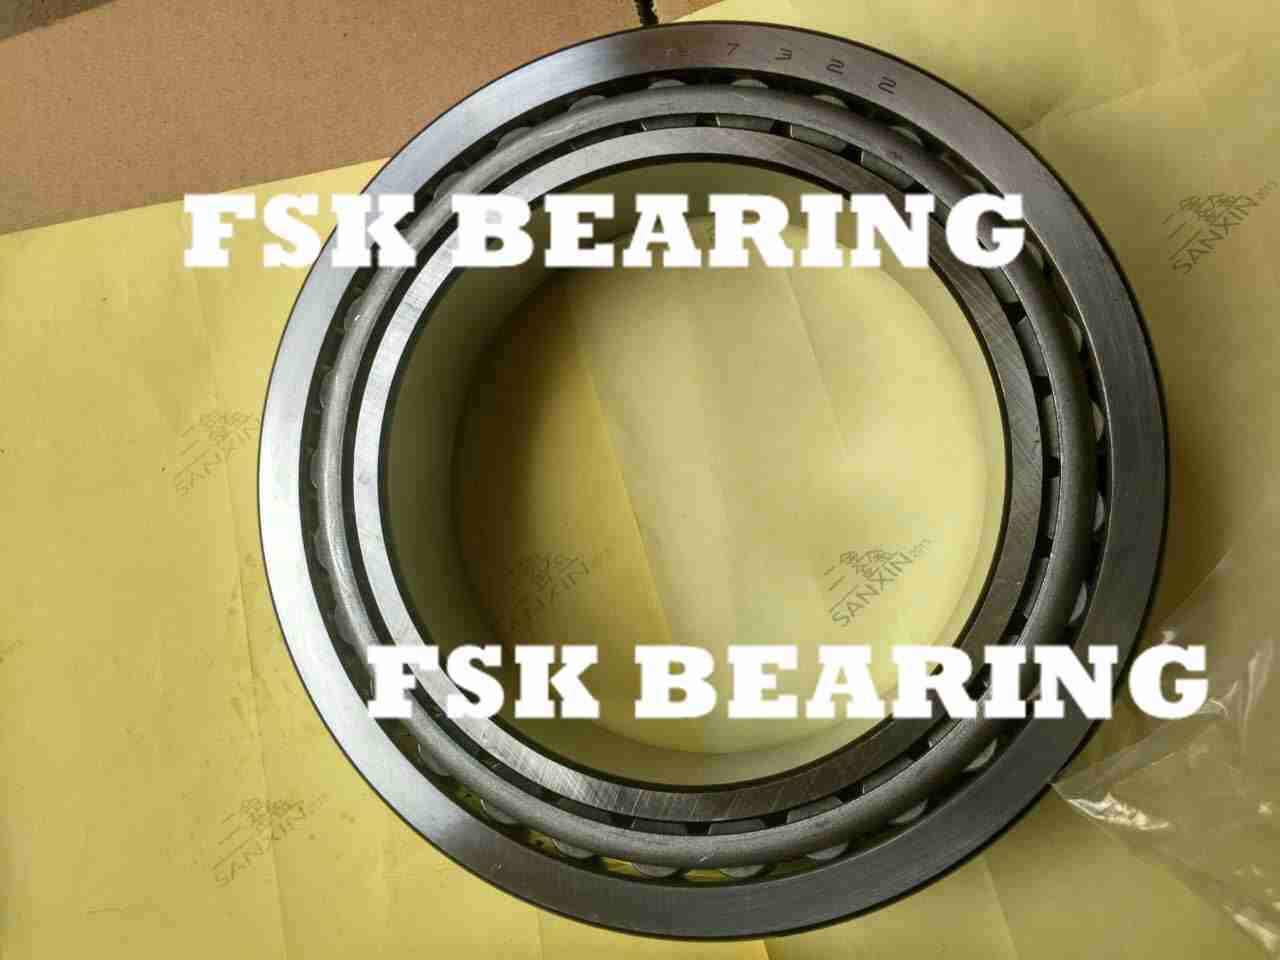 L555233/L555210 Tapered Roller Bearing 279.4x374.65x47.625mm